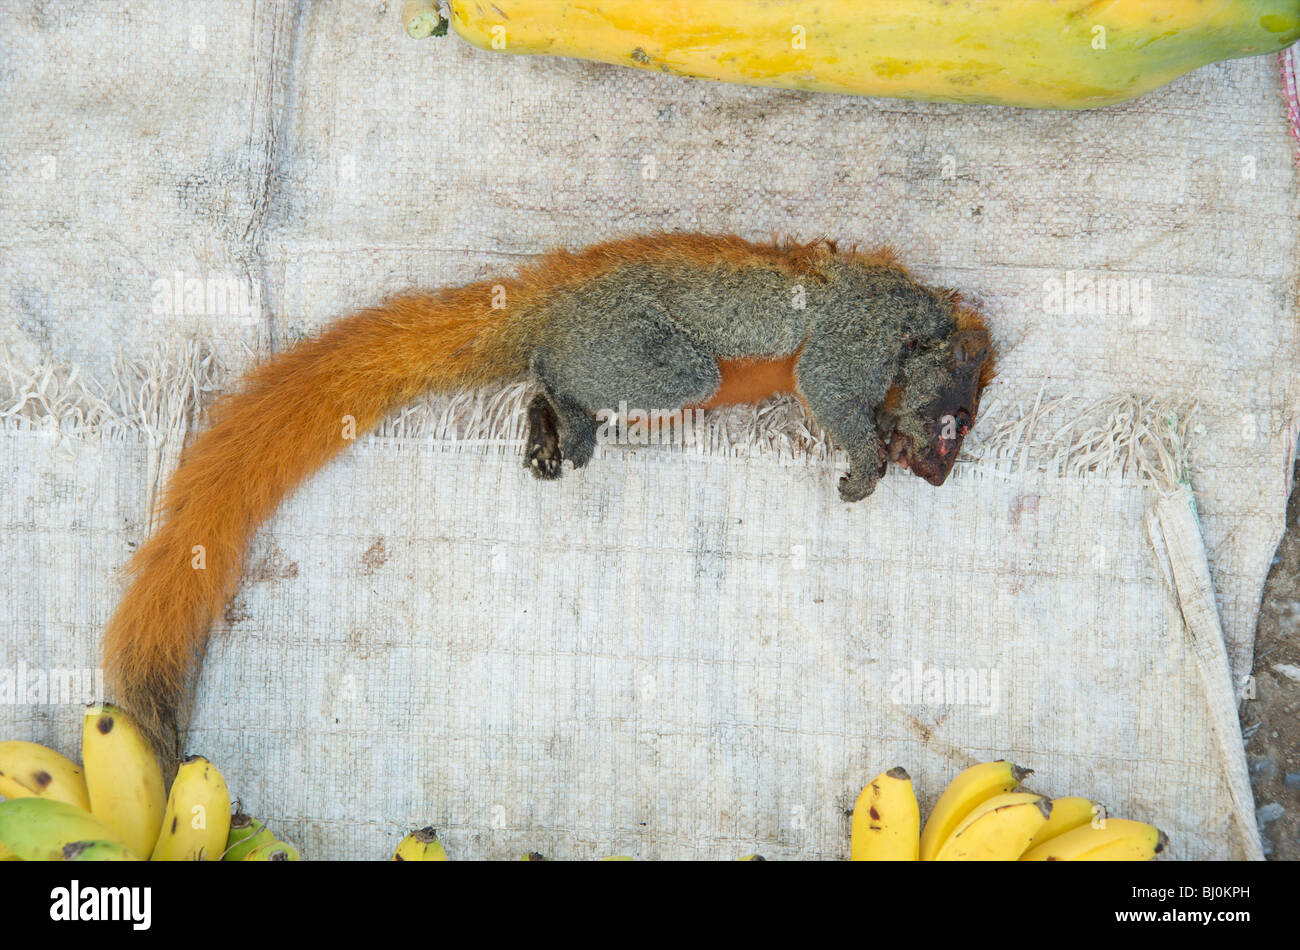 Red tailed squirrel on sale in Luang Prabang's food market Stock Photo